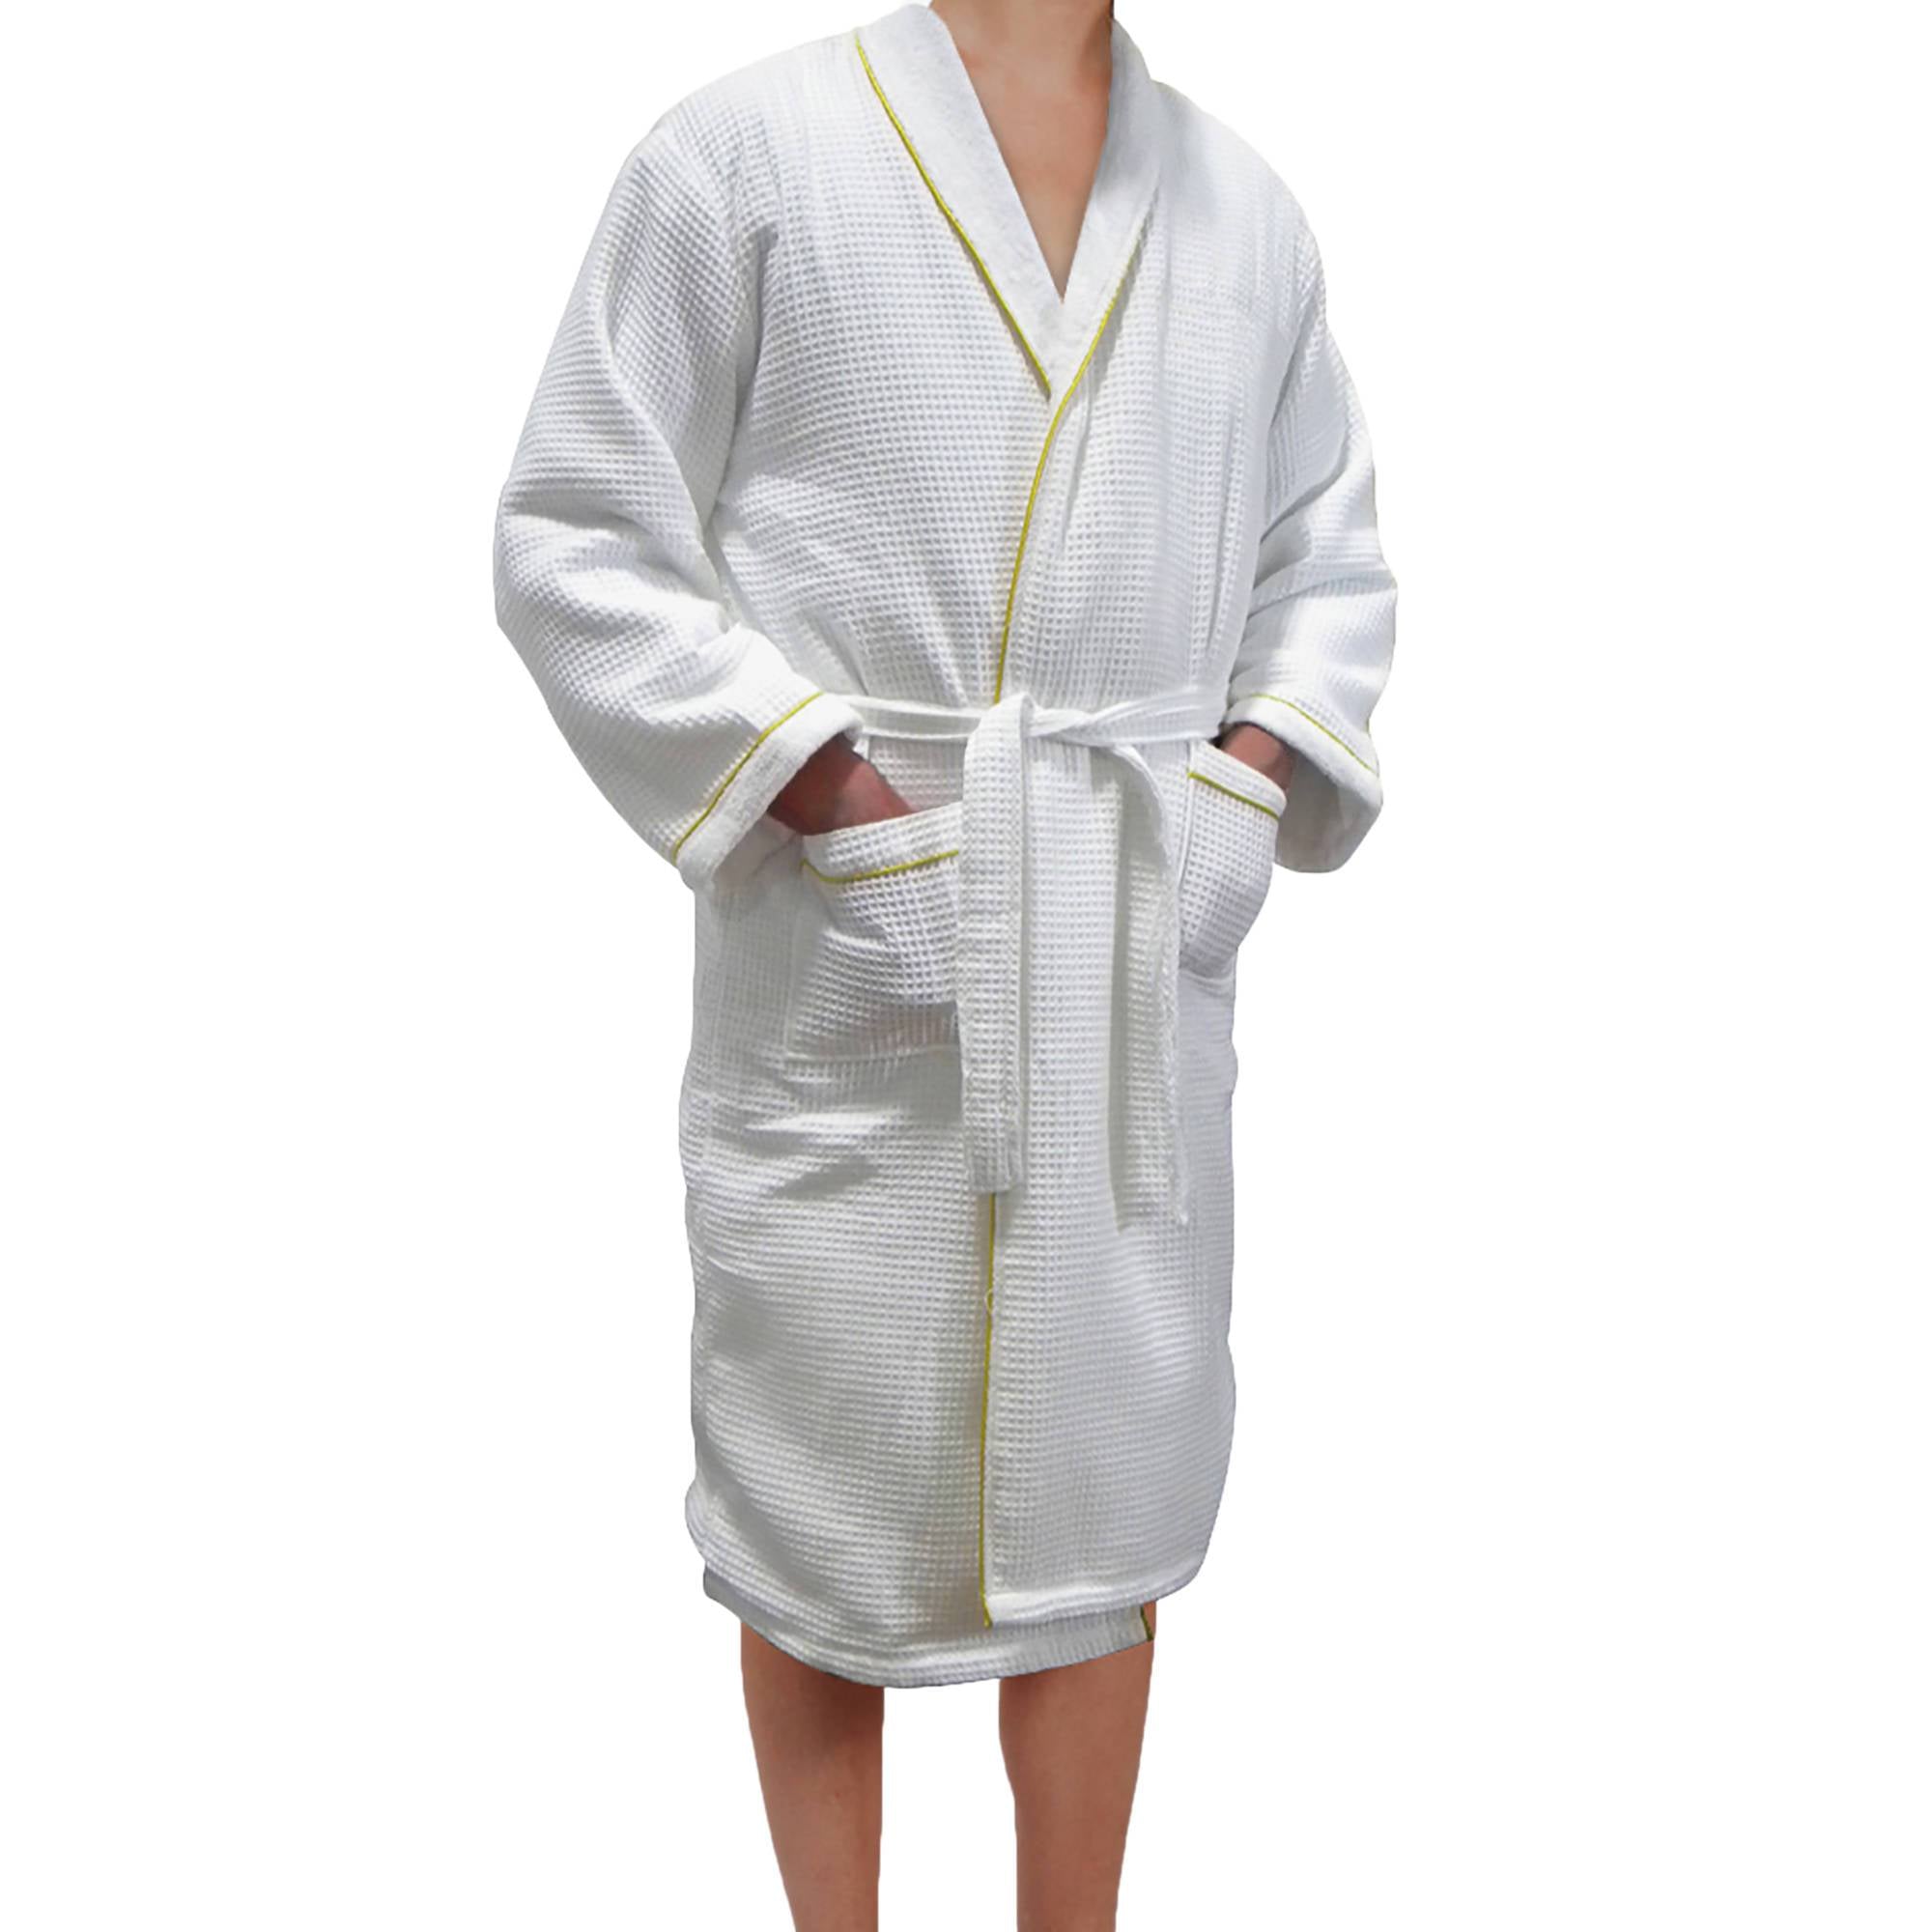 Blue Wave European Spa & Bath White Waffle Weave Terry Cloth Robe w/ Gold Embroidered Trim